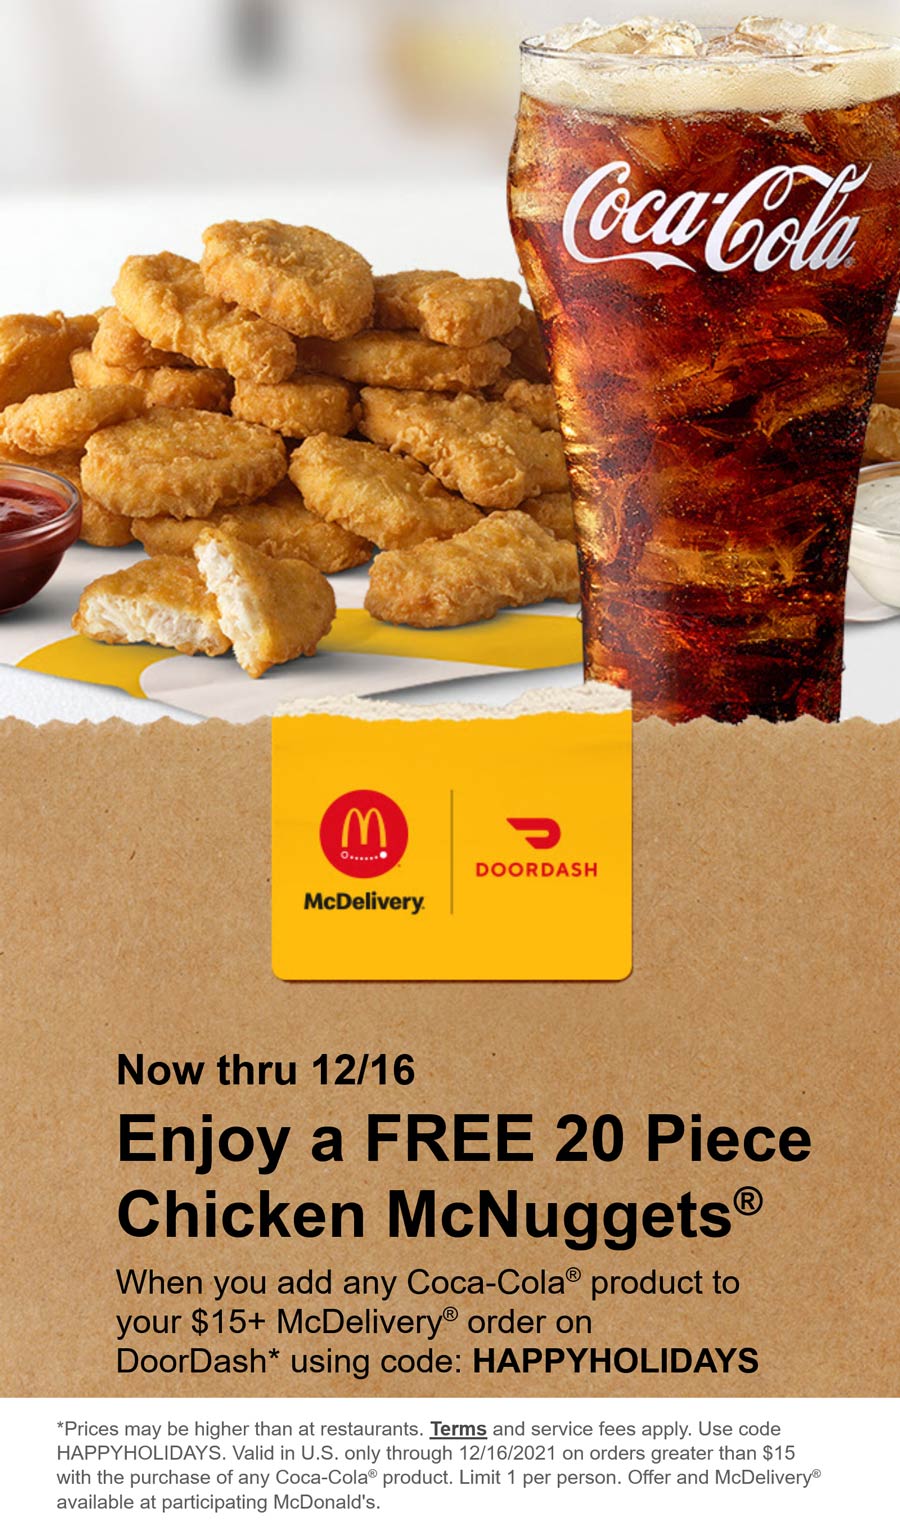 McDonalds restaurants Coupon  Free 20pc chicken mcnuggets with your drink via $15 delivery at McDonalds using promo HAPPYHOLIDAYS #mcdonalds 